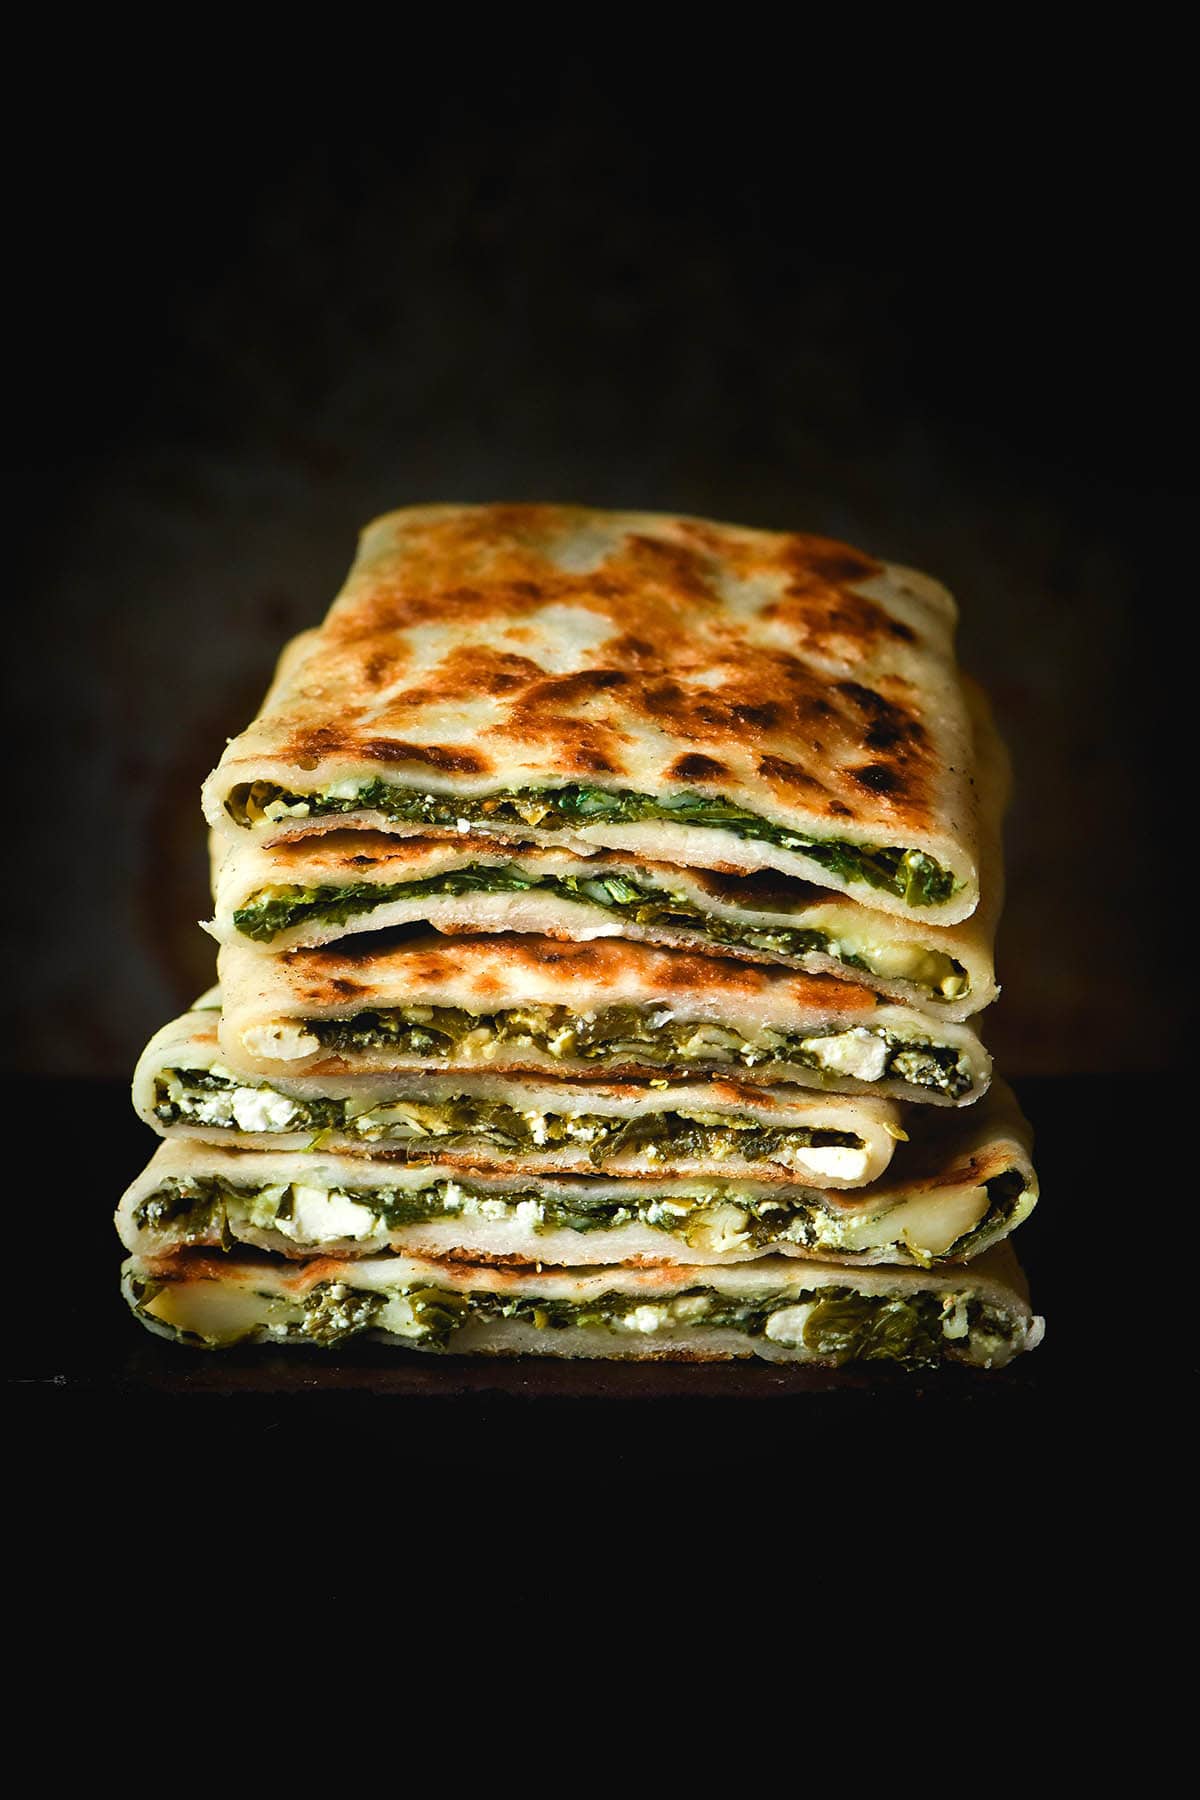 A dark and moody side on image of a stack of gluten free gozleme stuffed with spinach and feta.